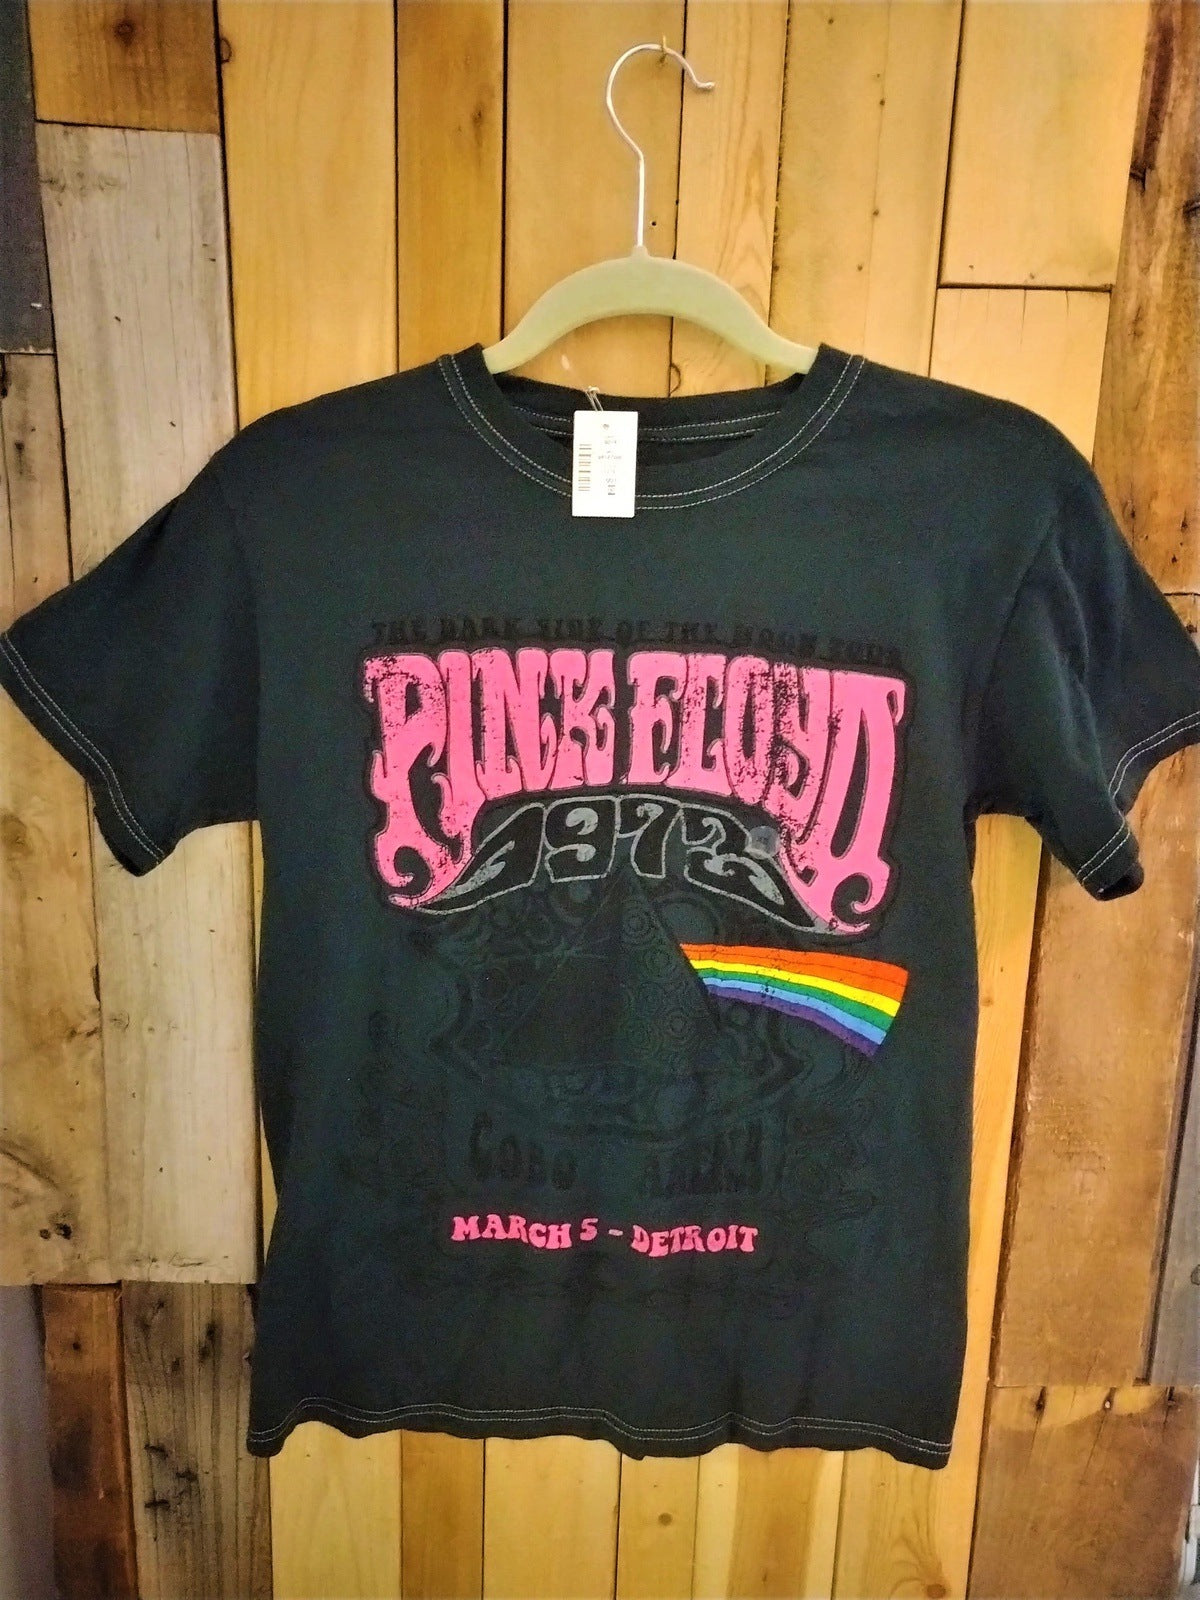 Pink Floyd "Dark Side of the Moon" Official Merchandise T Shirt Size XS New with Tags